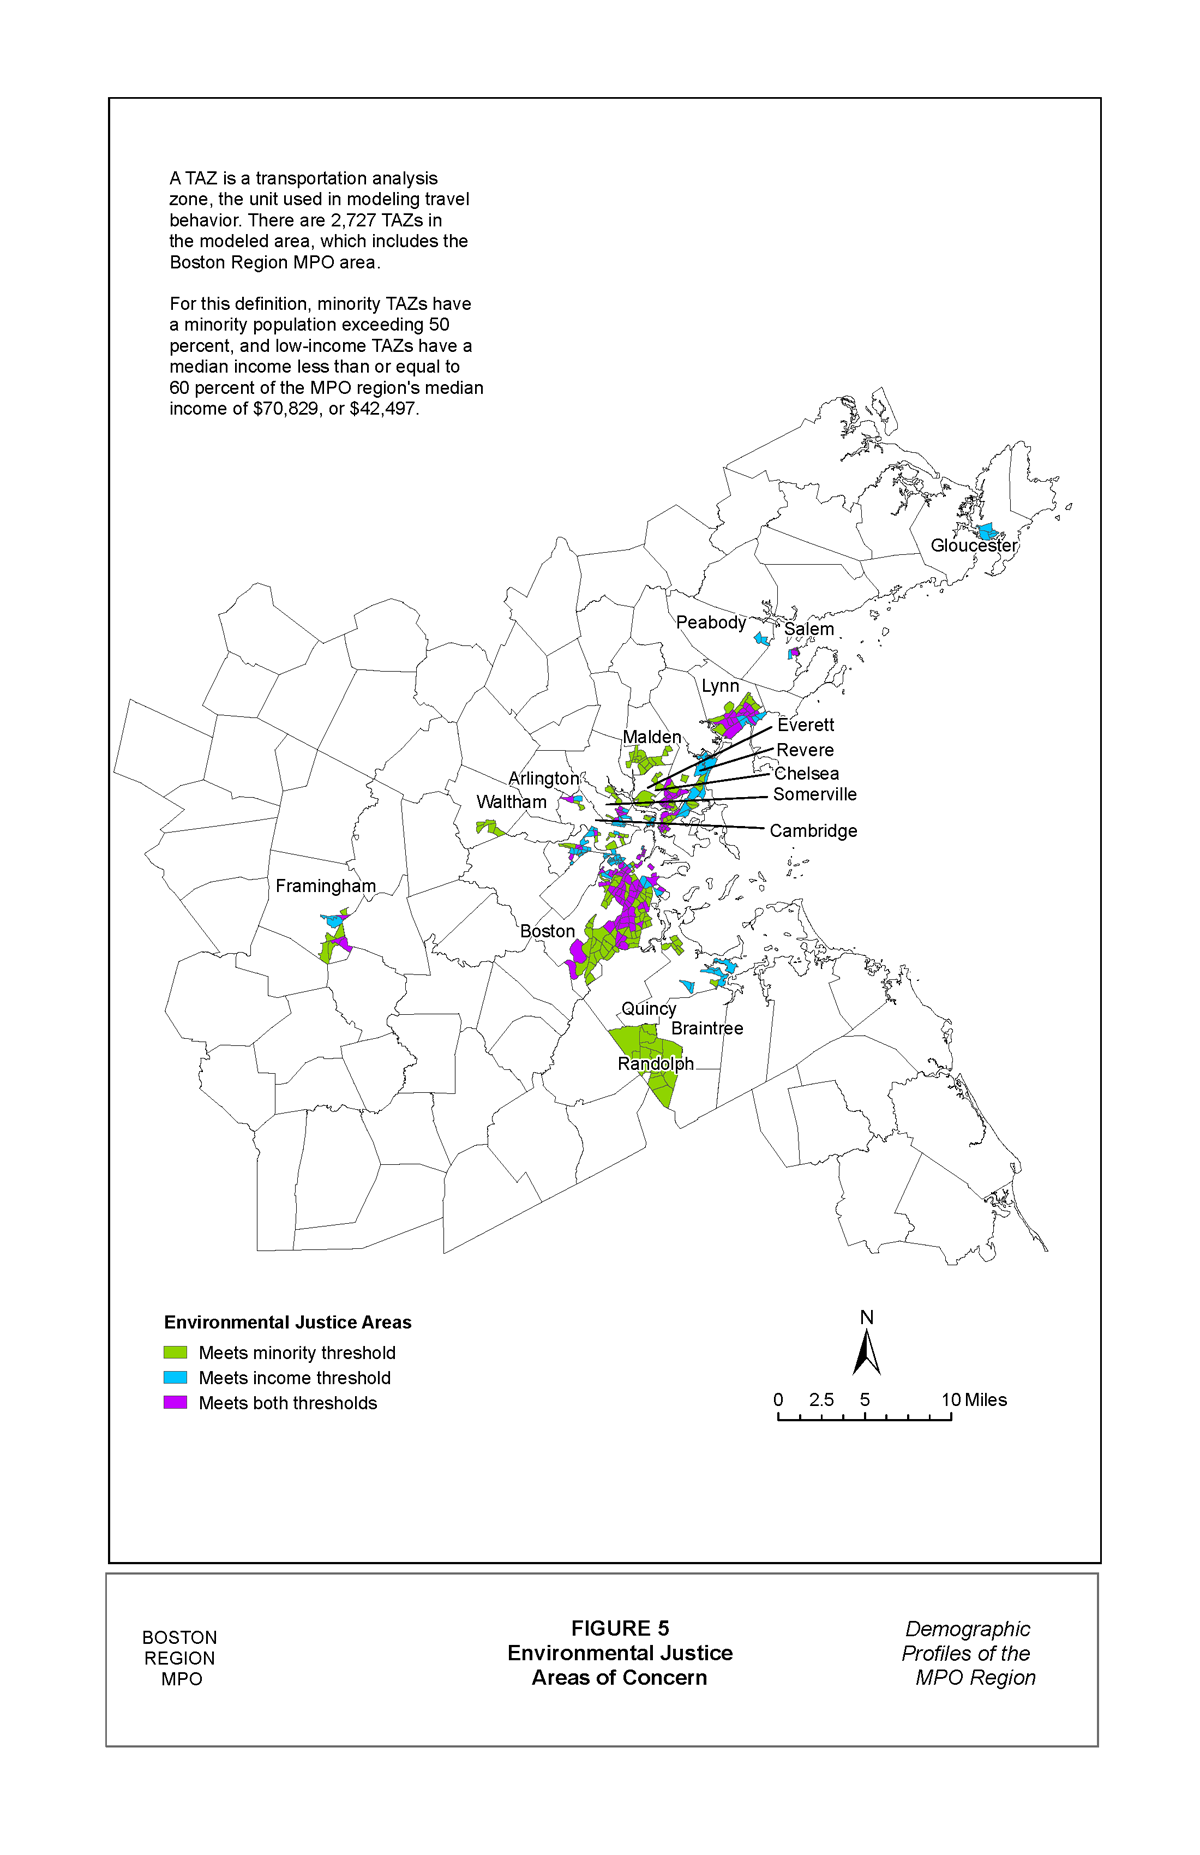 Figure 5 is a map that shows the MPO’s Areas of Concern. Areas of Concern are TAZs that have a minority population exceeding 50% of the total population and/or have a median household income of less than or equal to 60% of the regionwide median household income of $70,829, or $42,497.